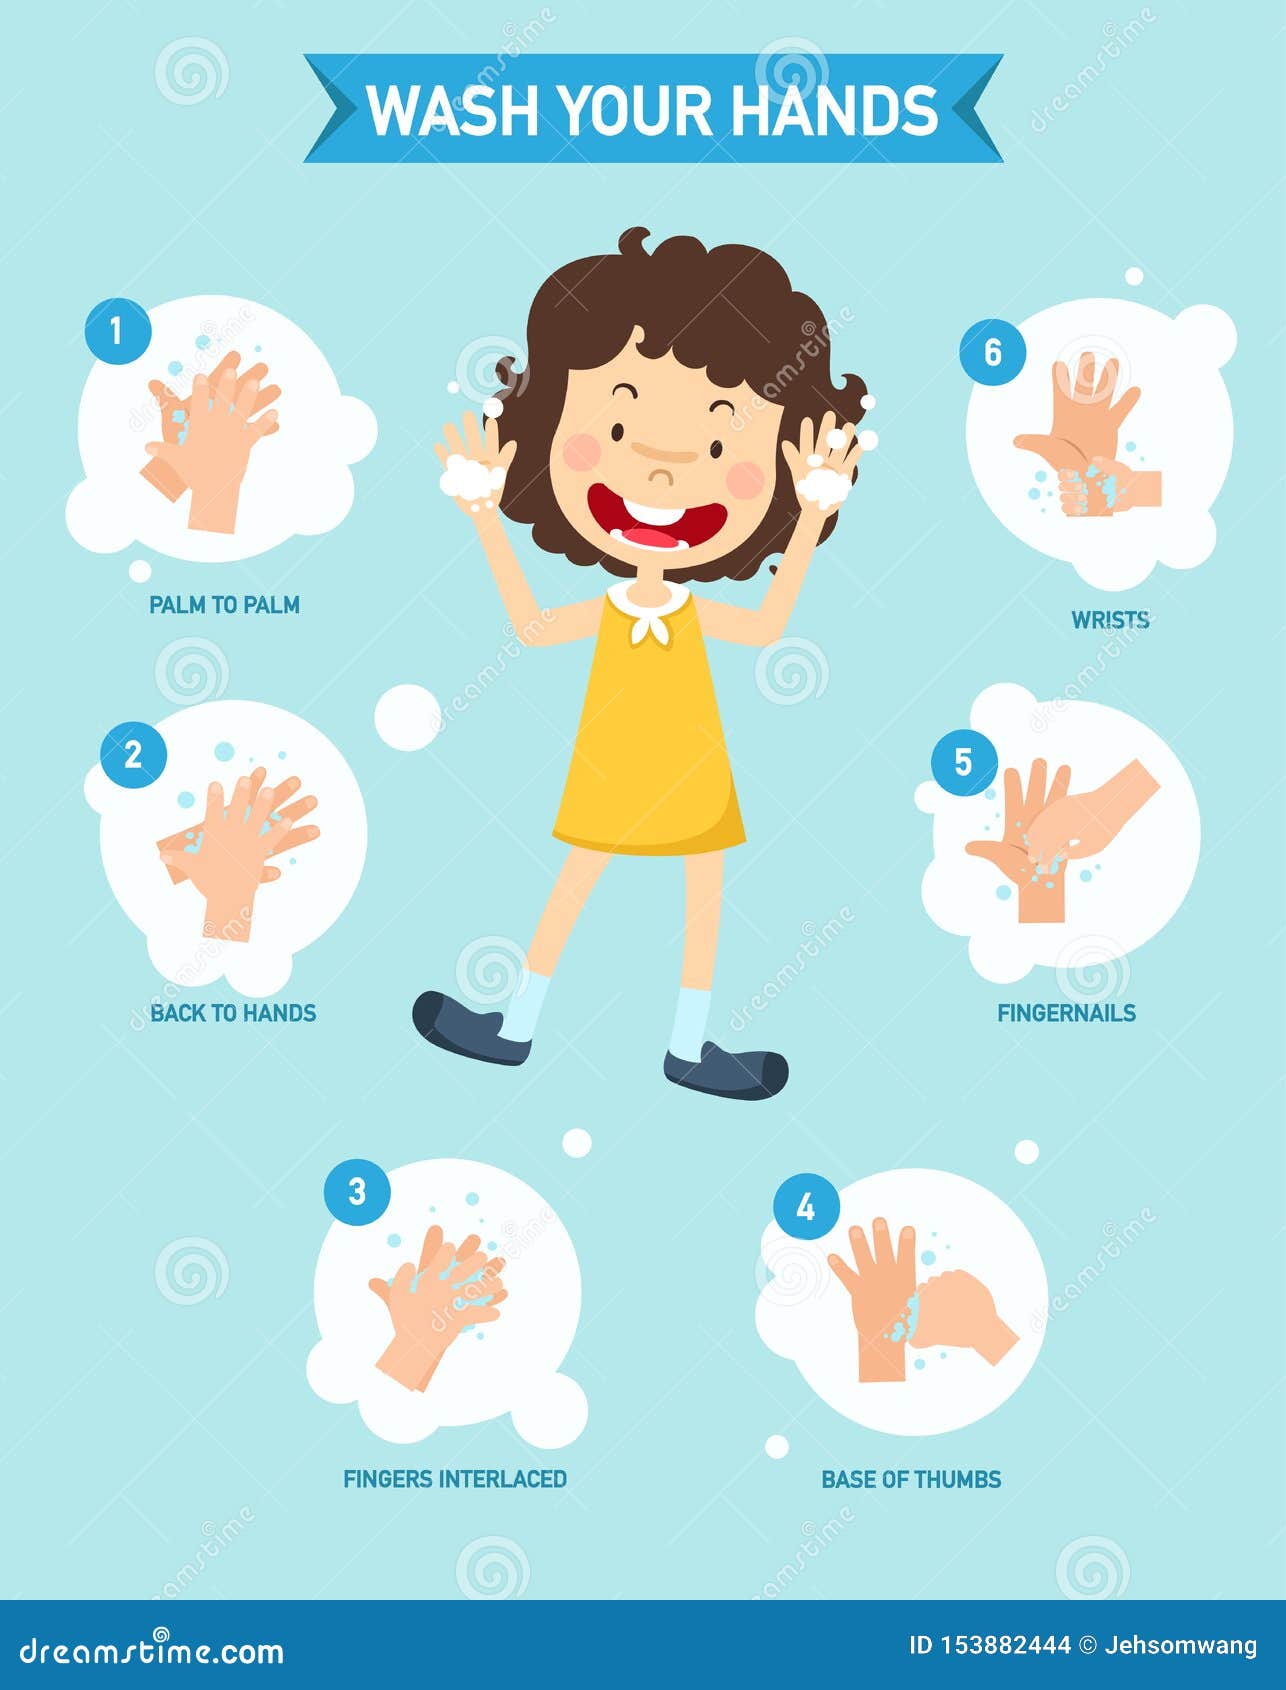 how to washing hands properly infographic,